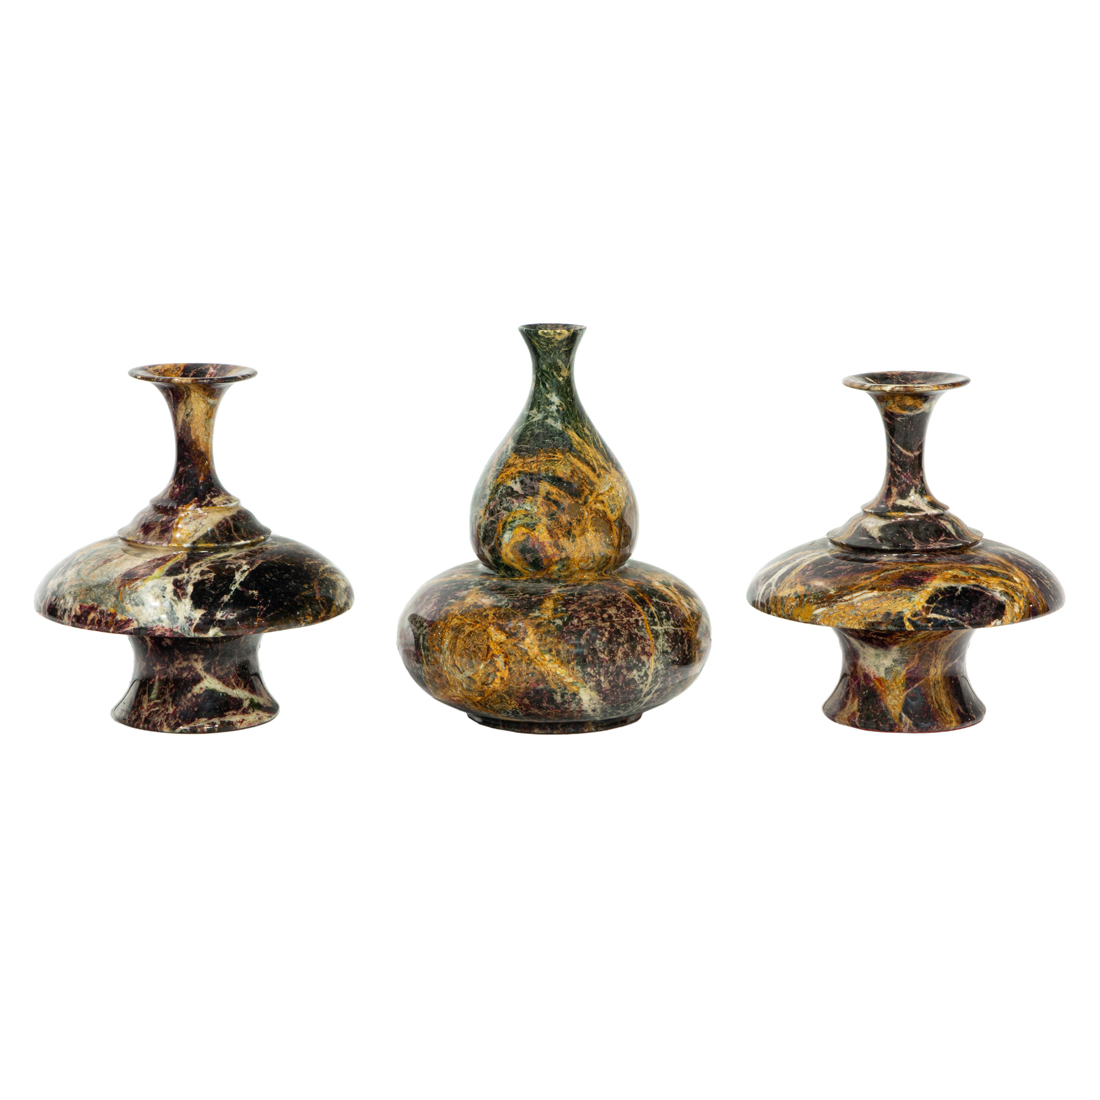 THREE CARVED AND POLISHED VARIEGATED 3b41e5